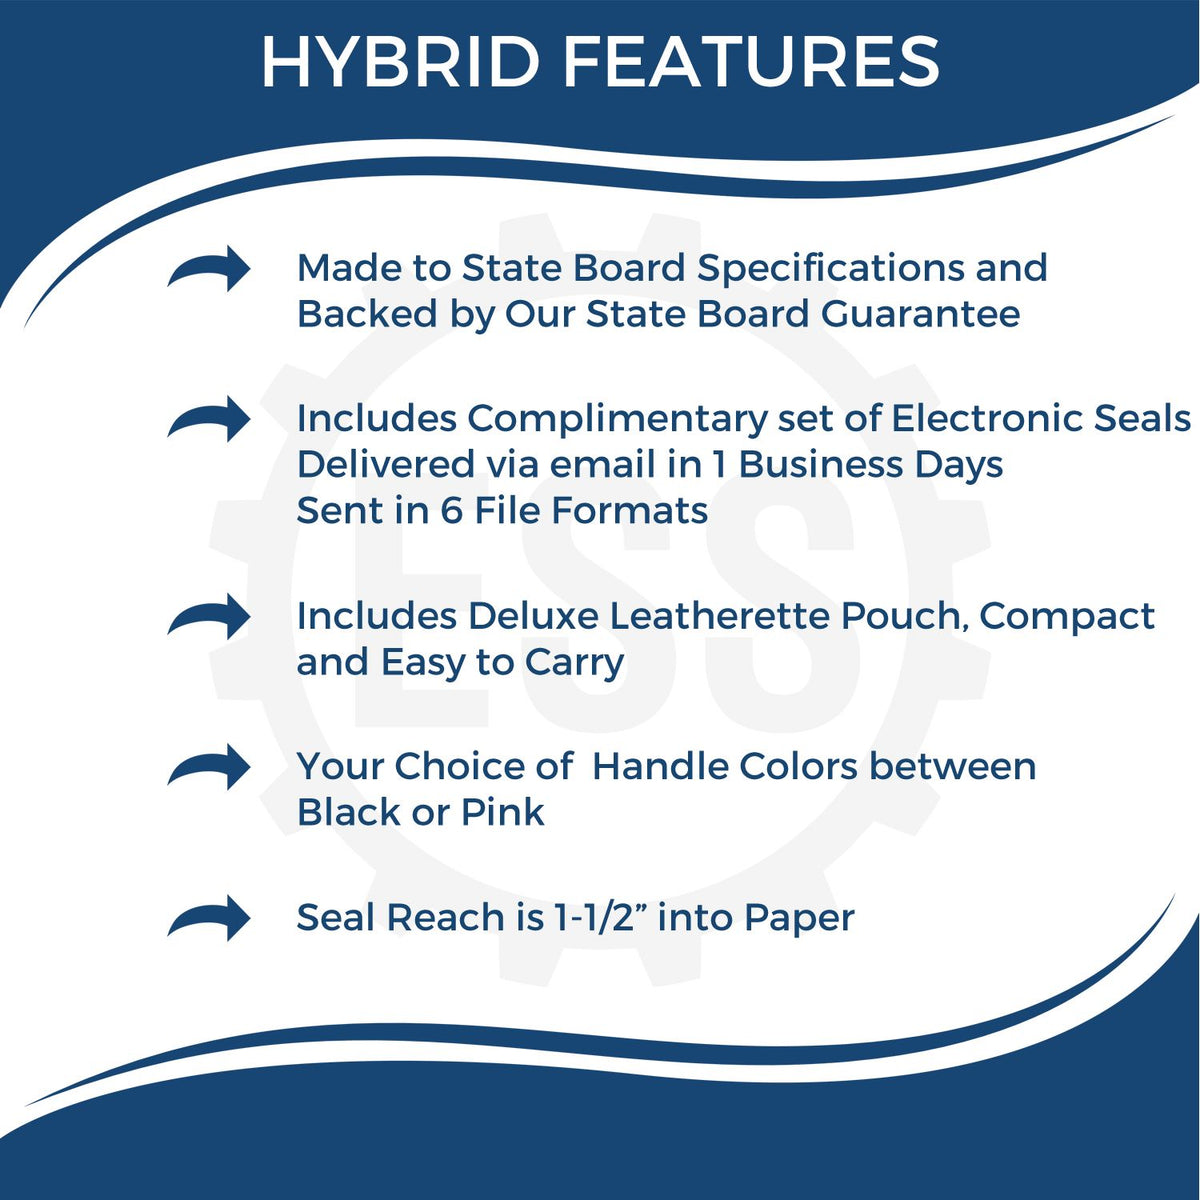 A picture of an infographic highlighting the selling points for the Hybrid Virginia Land Surveyor Seal